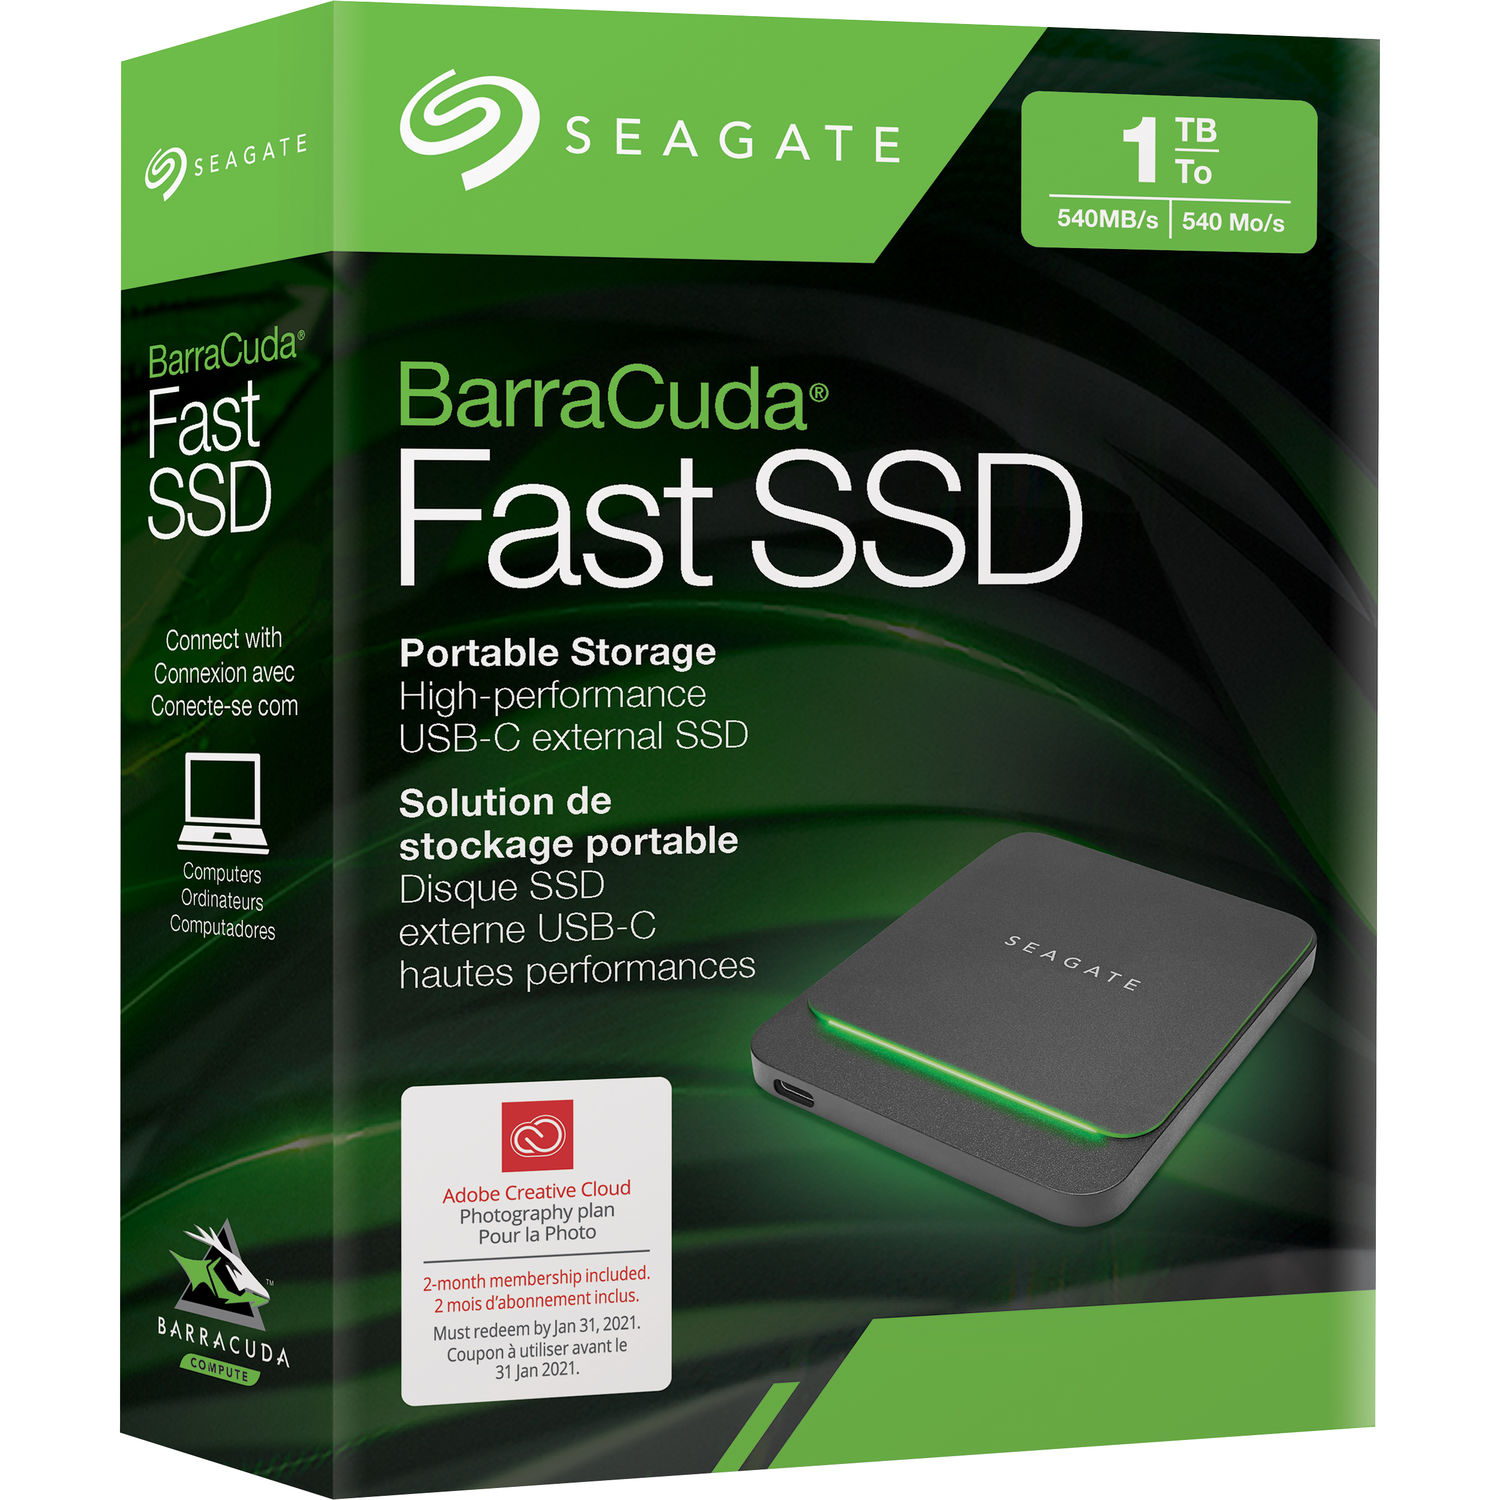 Seagate BarraCuda STJM1000400 1TB Portable Solid State Drive - image 5 of 5